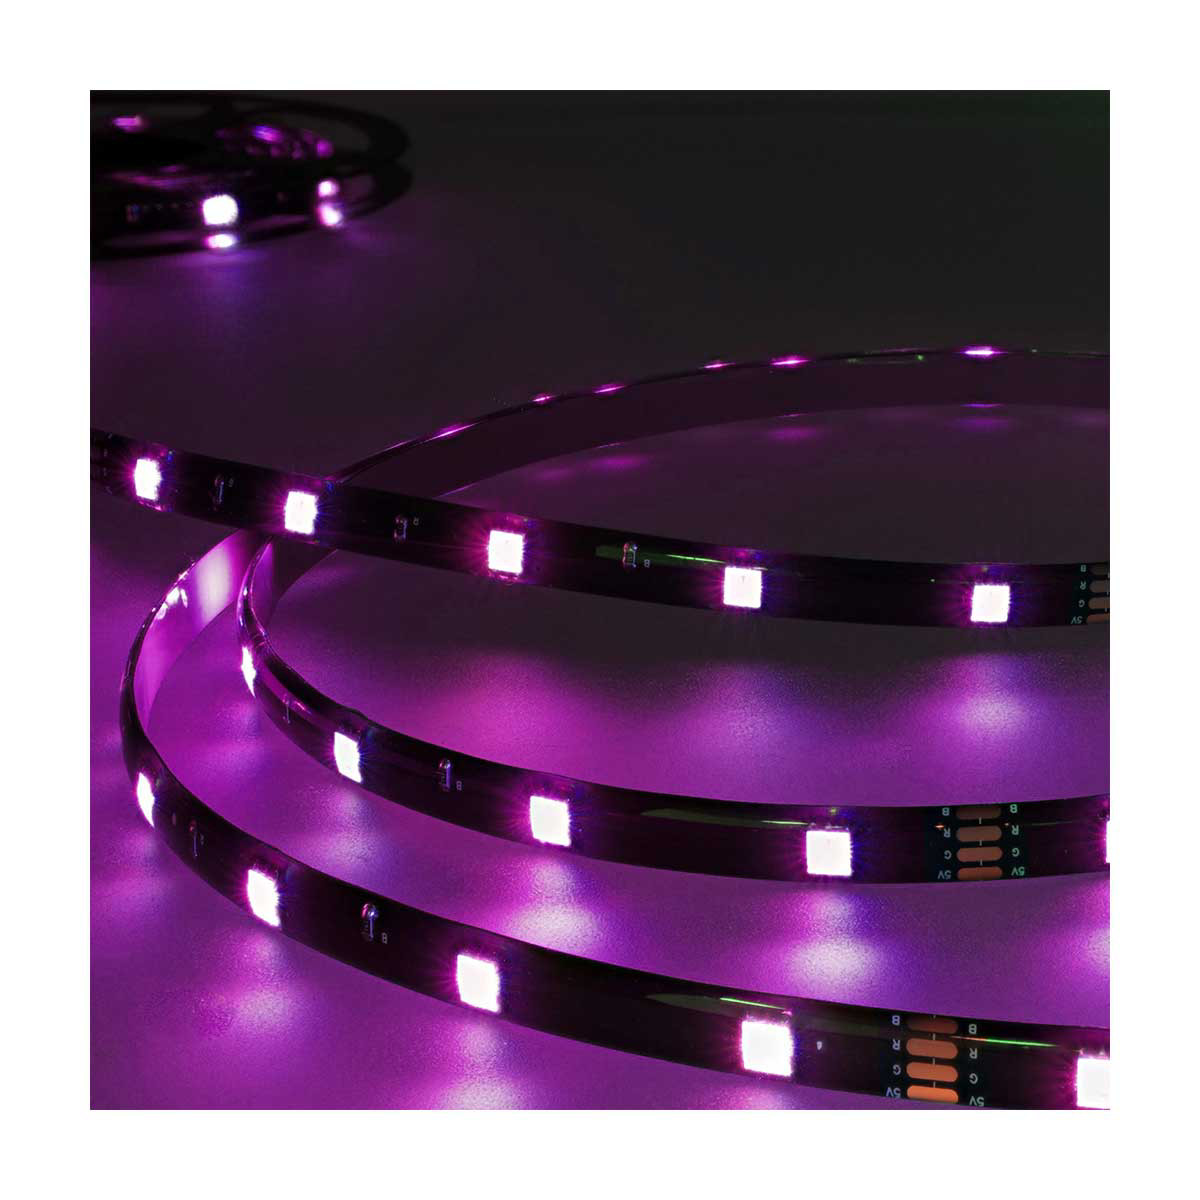 Xtreme Lit Multicolor LED Light Strip with Remote Control, 12 Feet